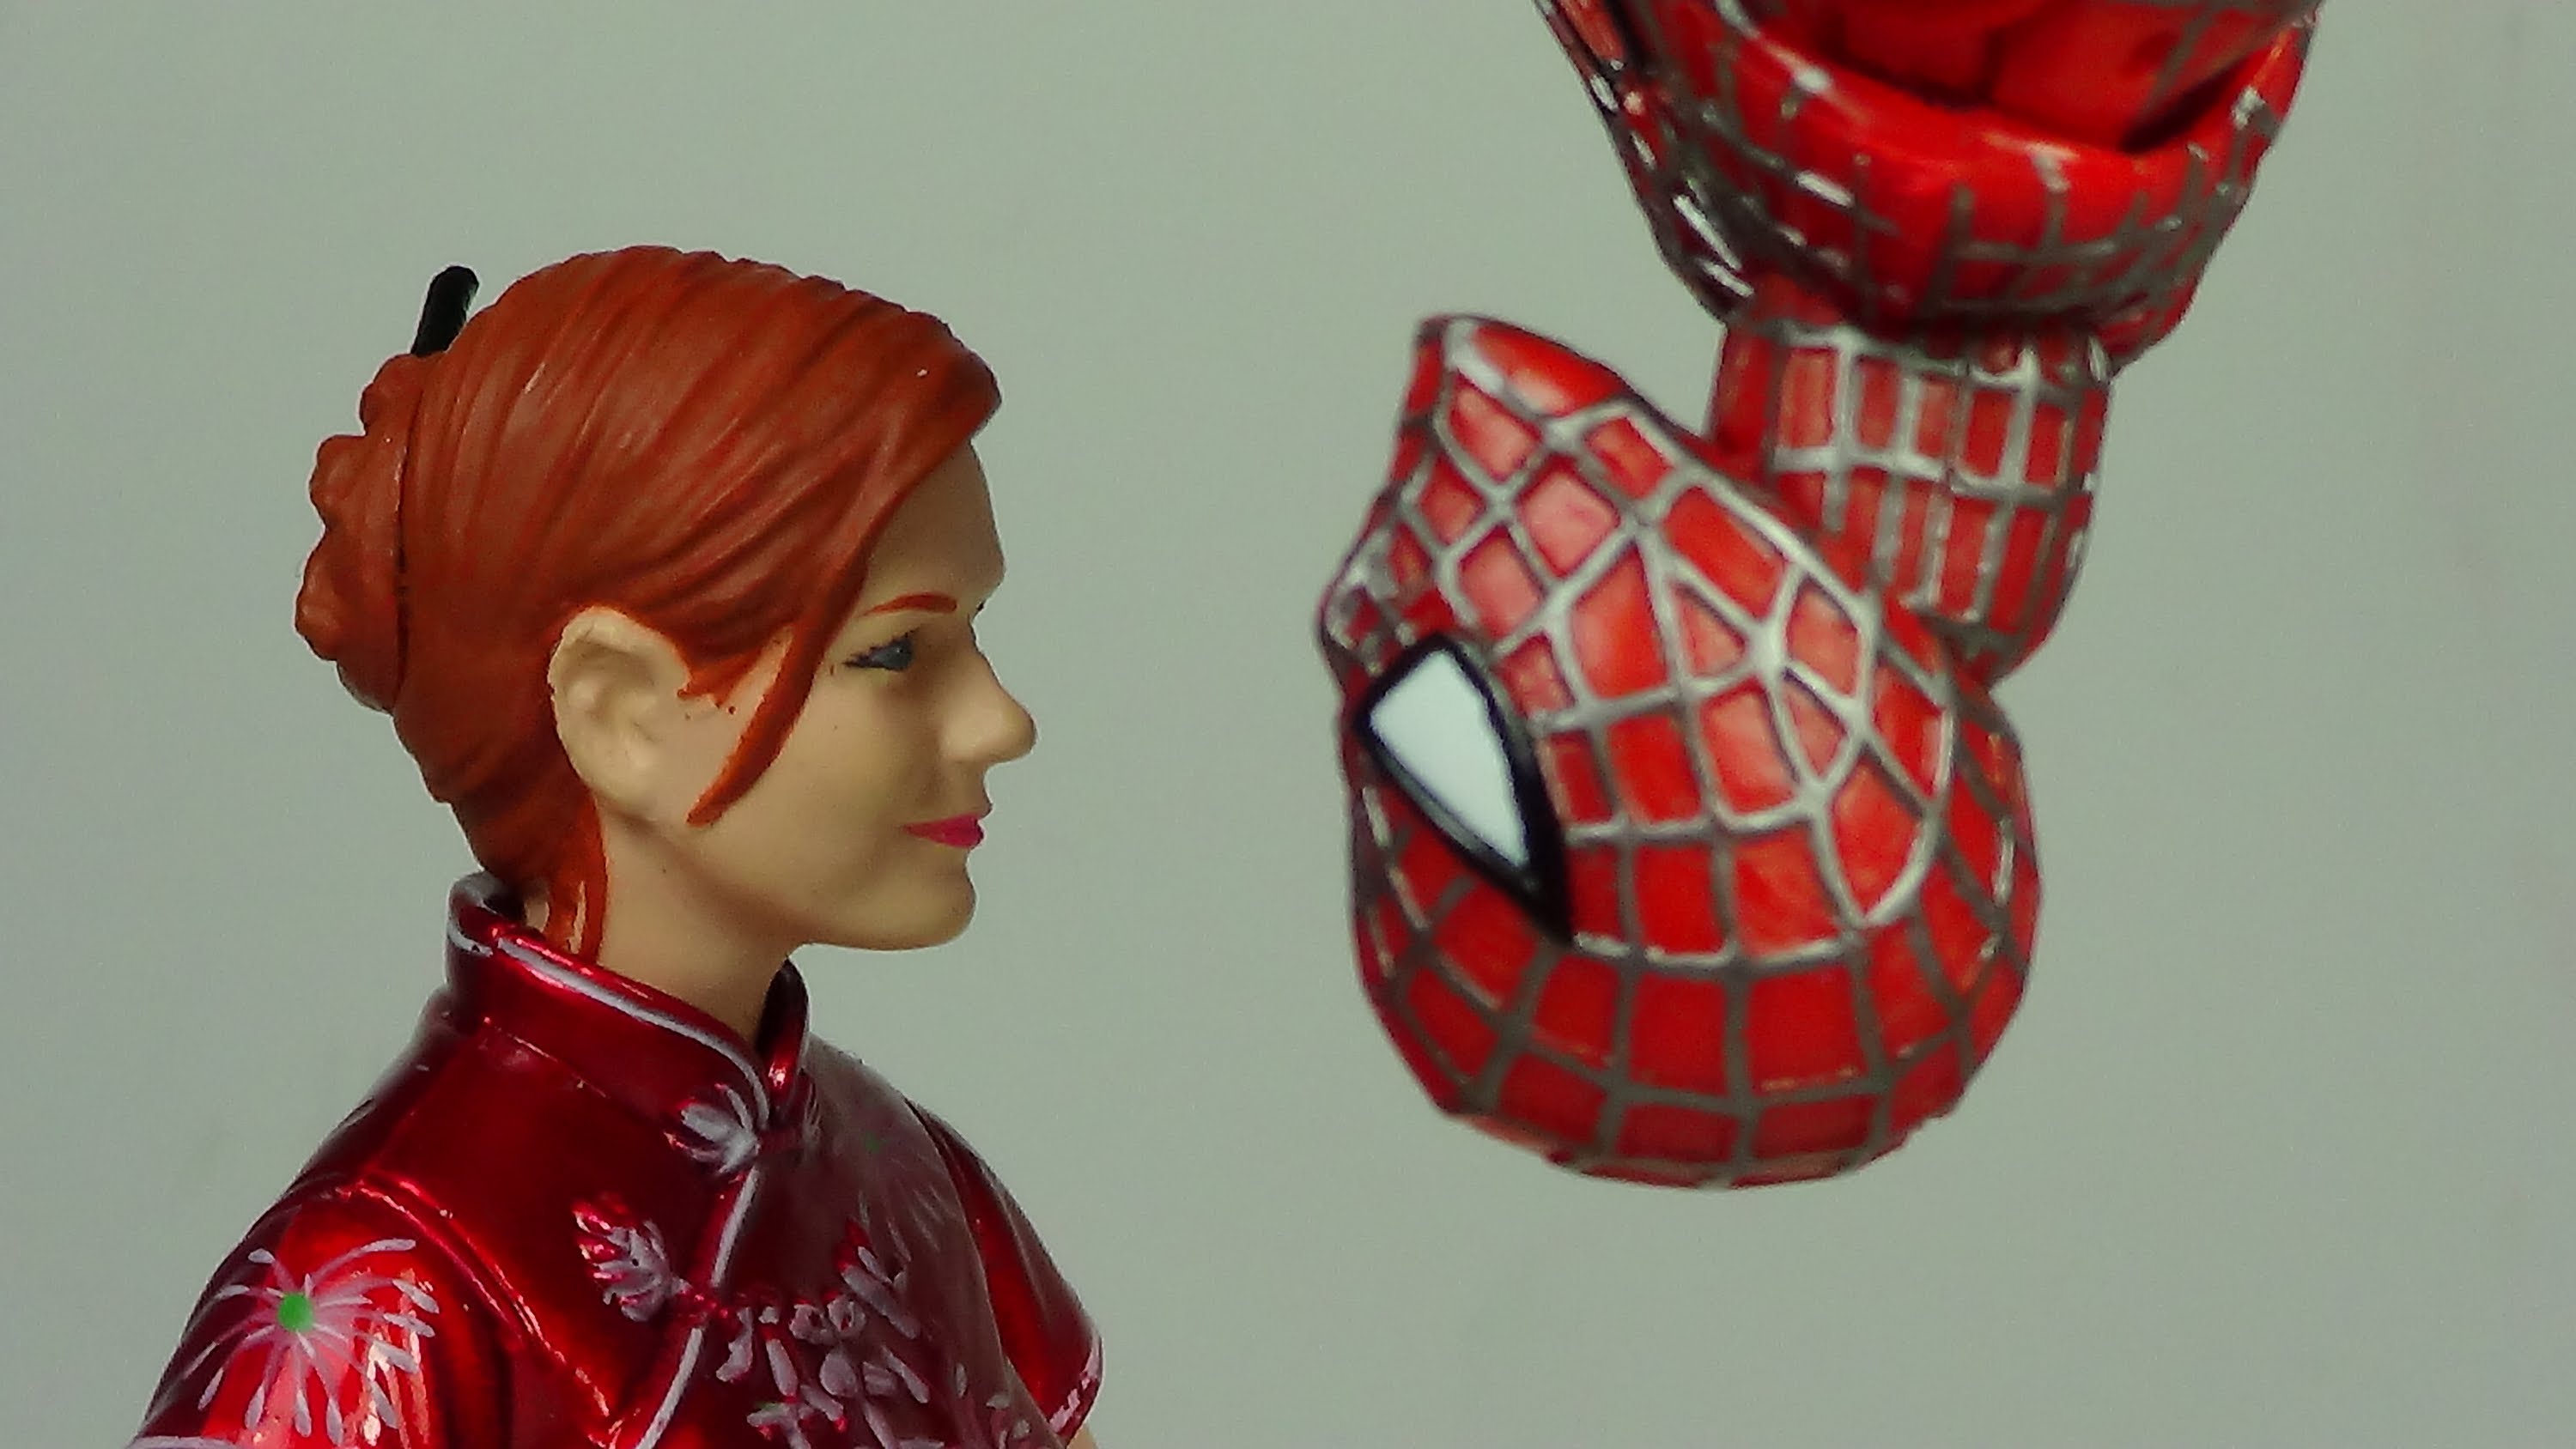 Marvel Legends Mary Jane (Spider-Man Movie) Figure Review - YouTube